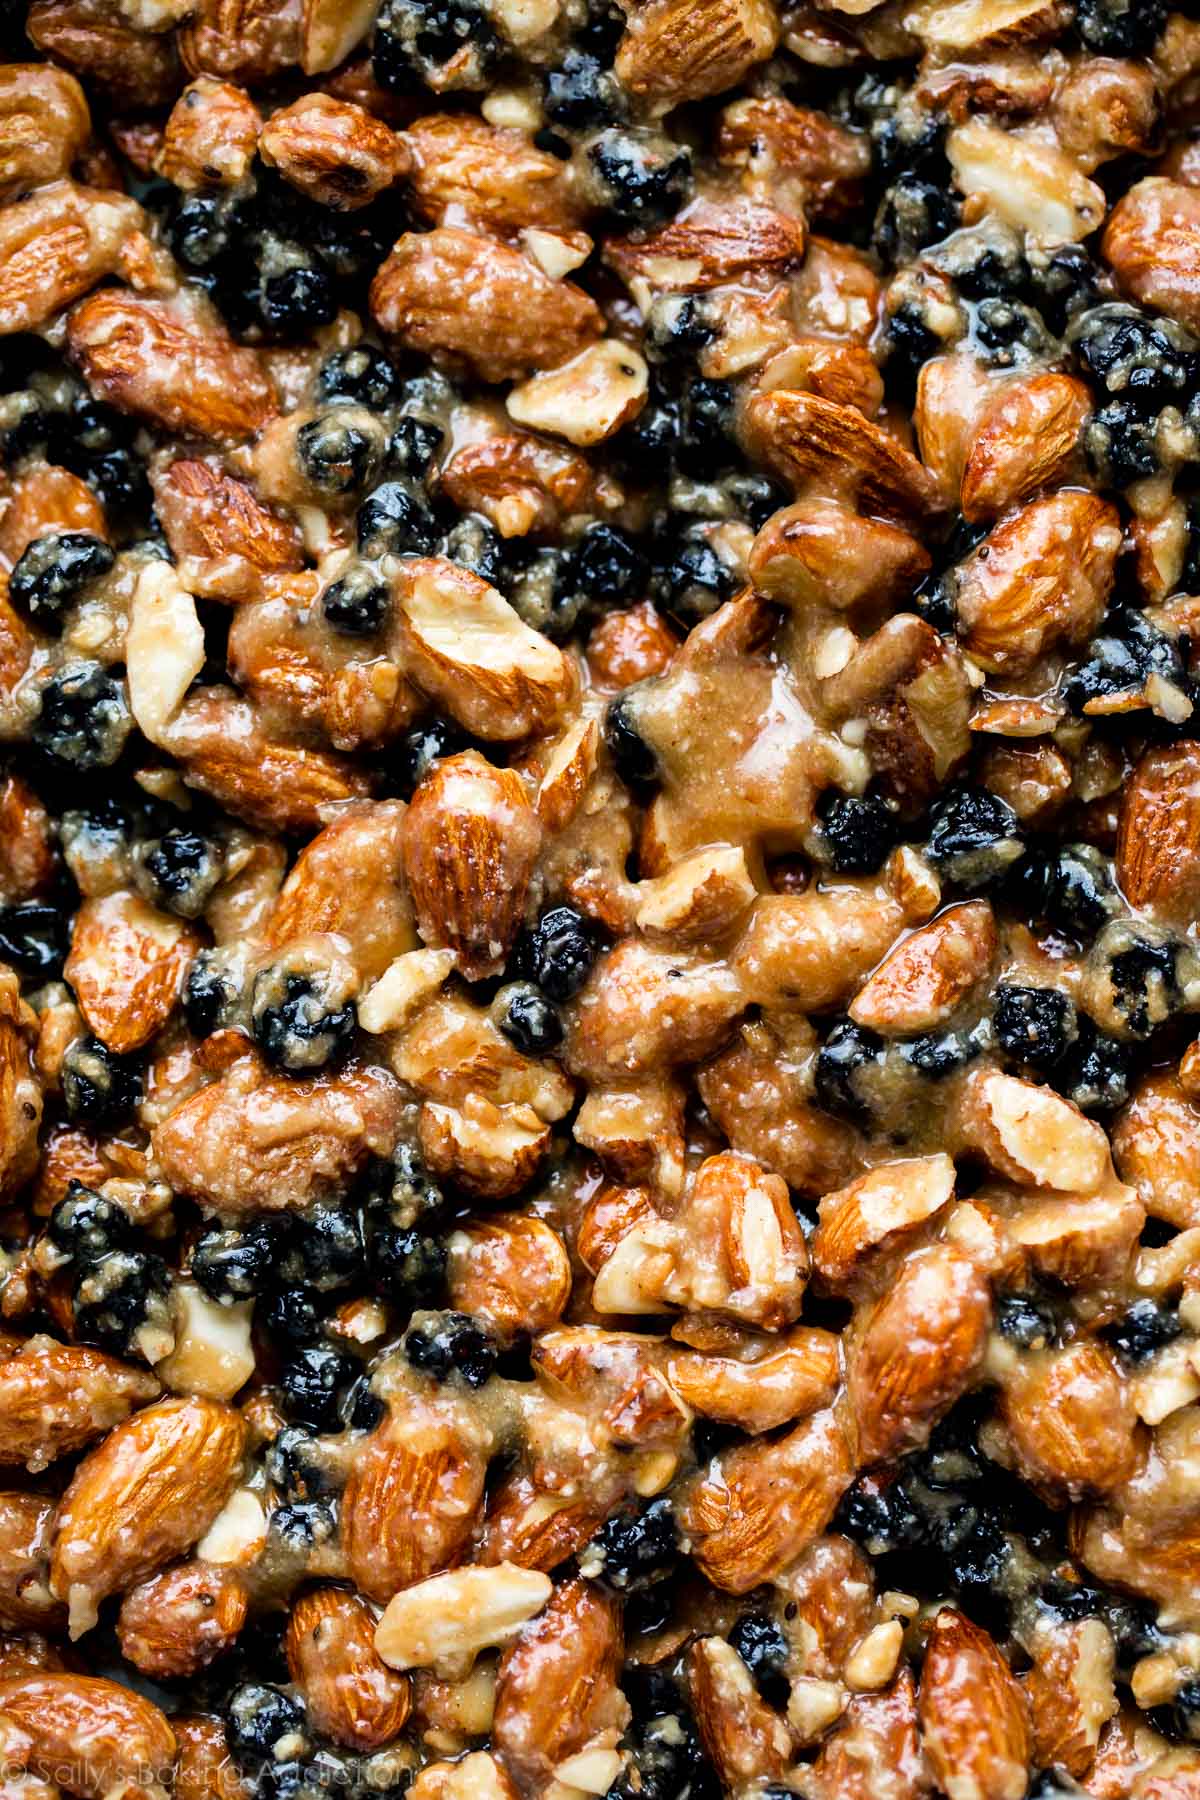 zoomed in image of blueberry almond snack bars before cutting